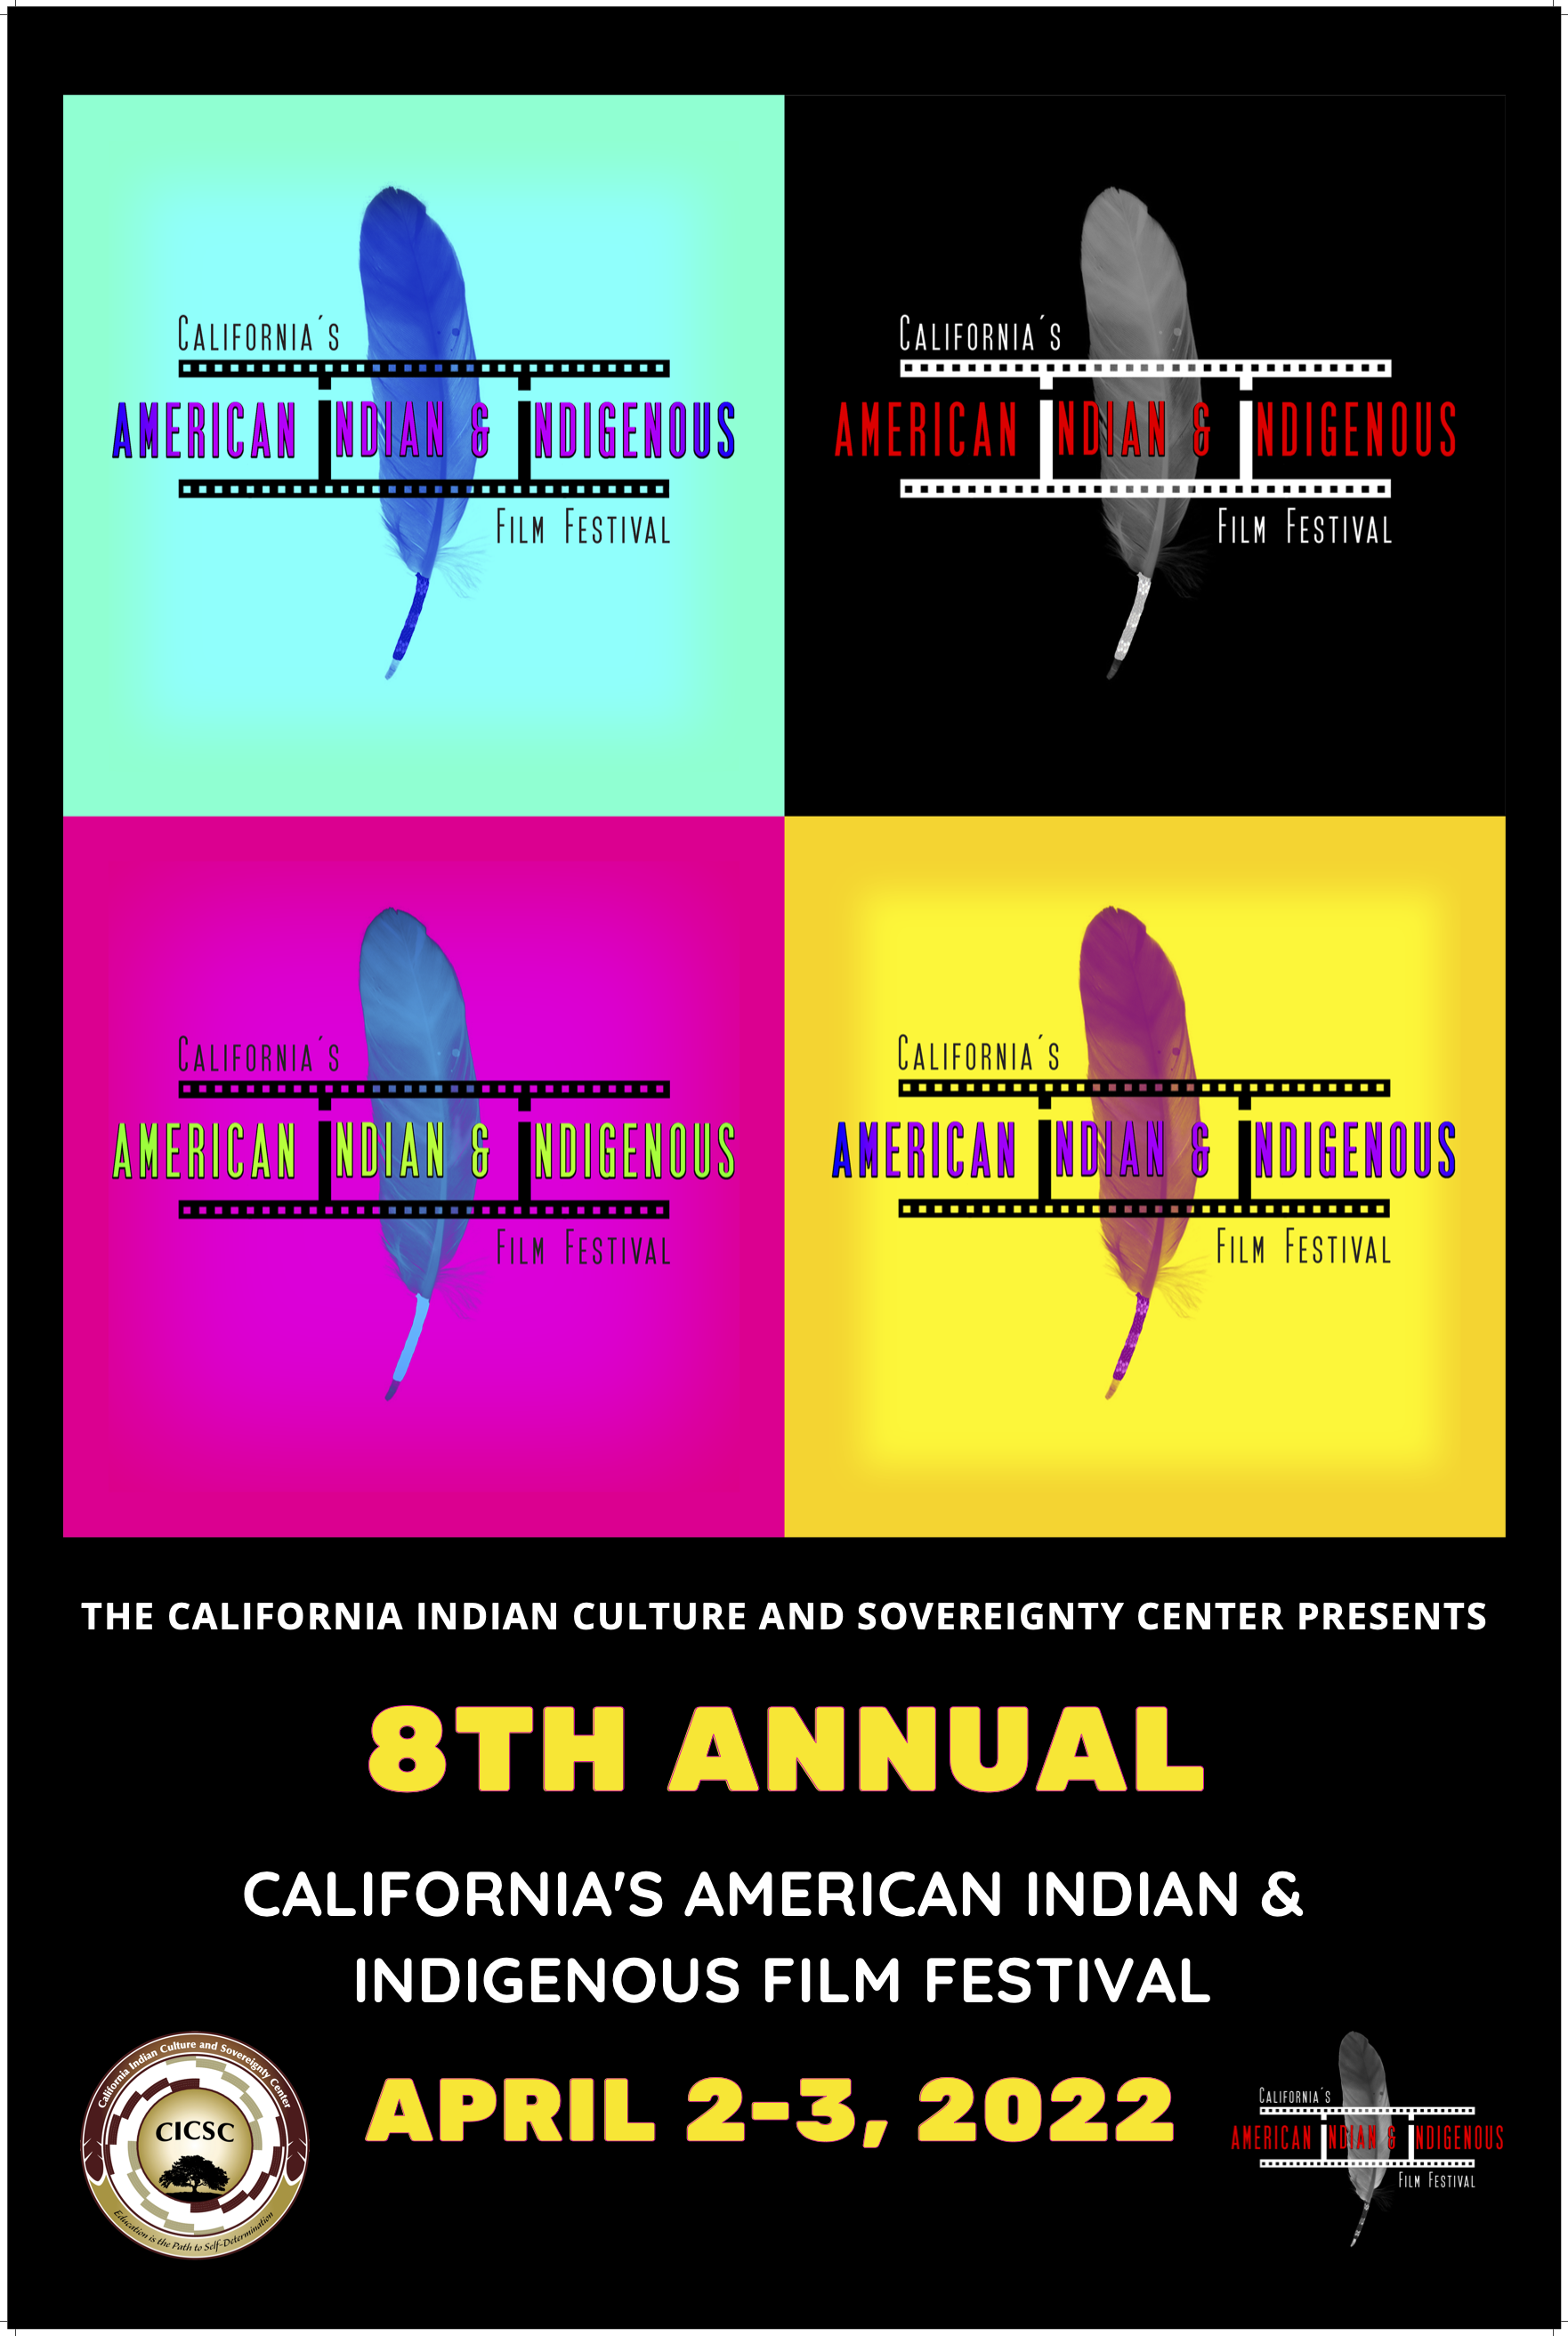 California's American Indian and Indigenous Film Festival (CAIIFF) 2022 Poster with the CAIIFF in four different Andy Warhol-inspired color versions